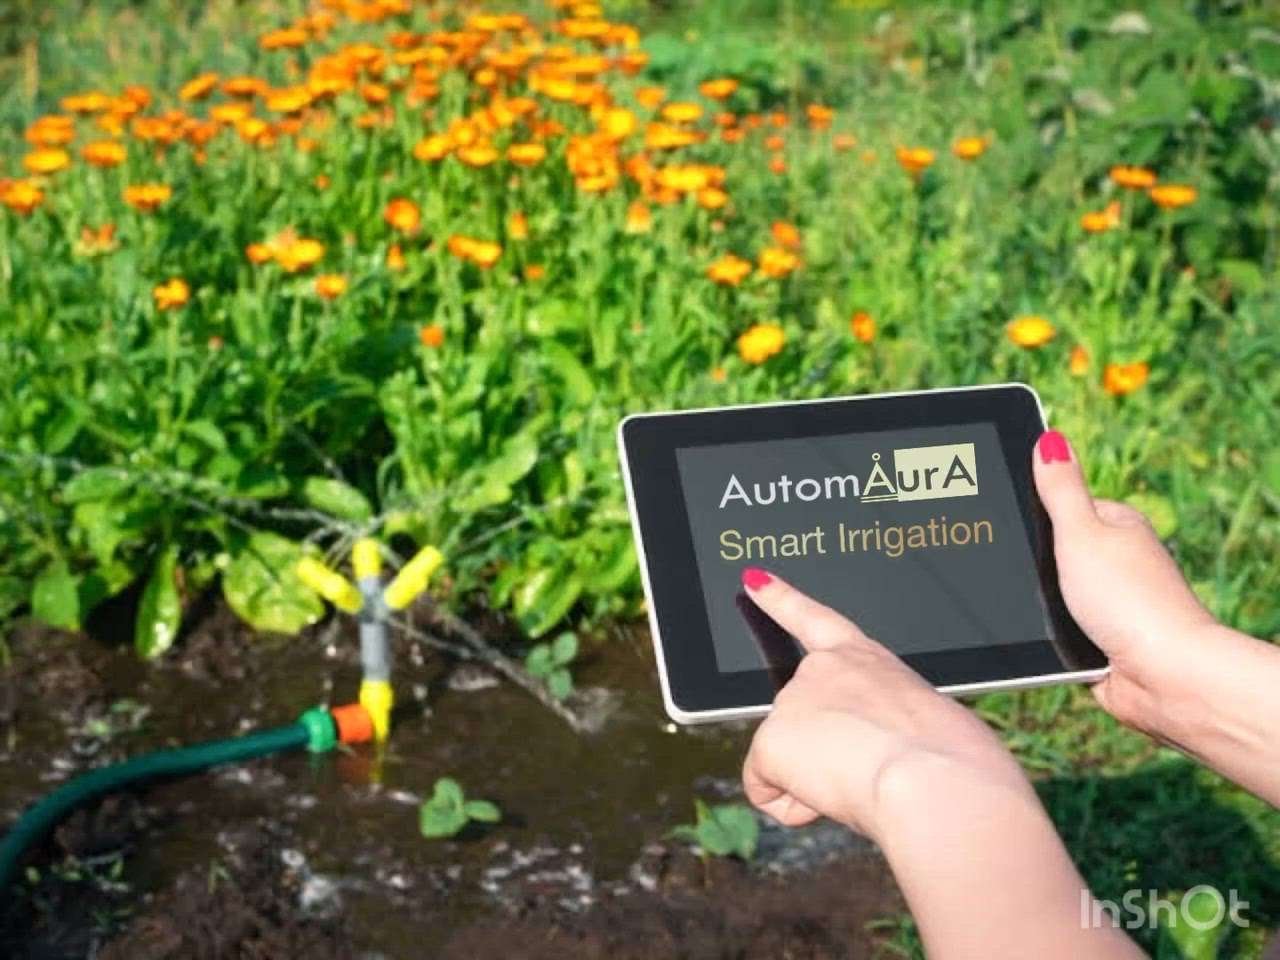 Smart Irrigation Automation By AUTOMAURA’s Home Automation Robots & Products which are rich in quality & best in class with state of the art functionalities. #HomeAutomation #InteriorDesigner  #Architectural&Interior  #LUXURY_INTERIOR #interiorcontractors #architact #_builders #indorefood #indorediaries #indorearchitect #indorearchitect #constructioncompany #ConstructionTools #commercial_building #palaster #InteriorDesigner #CivilEngineer #engineers #IndoorPlants #LUXURY_SOFA #scorio_lights_manjeri #BalconyLighting #CelingLights #lightsinthesky #scorio_lights #lights #BathroomDesigns #washroomdesign #faucets #jaguar #jaguarfitting #LivingroomDesigns #drawingroom #ClosedKitchen #KitchenIdeas #LargeKitchen #KitchenRenovation #renovatehome #renovationoffice #renovation3d #MixedRoofHouse  #OfficeRoom #sittingarea #spaceplanning #lightcolour #BedroomLighting #lightyourlife #irrigation #IndoorPlants #plants #plantlife #RoseGarden #VerticalGarden #GardeningIdeas #WaterProofings #watering #water #WaterSafety #wasteManagement #dripirrigation #GardenPipes #Pipes #pipesandfittings #waterfountains